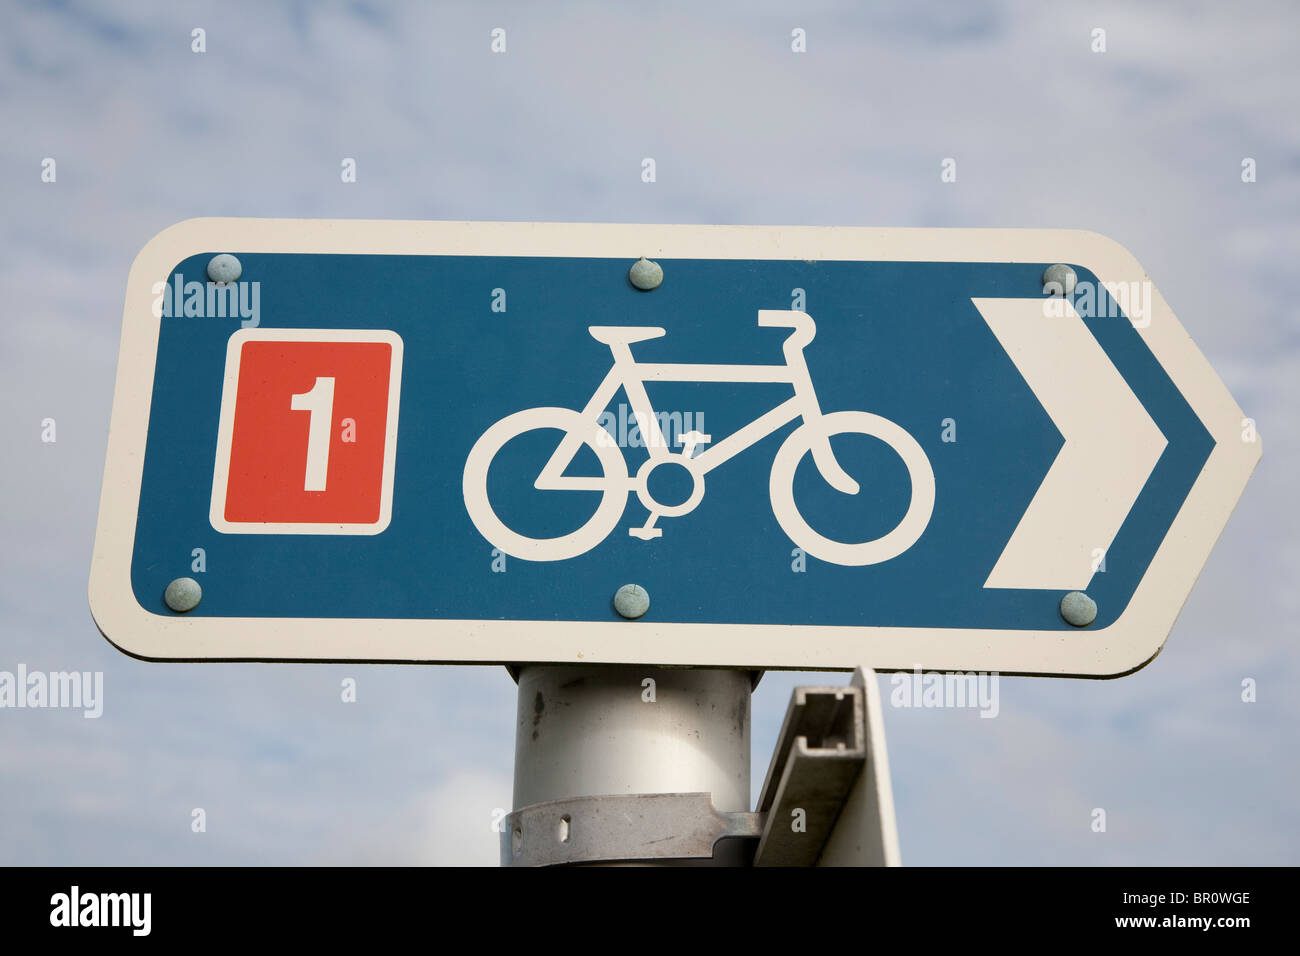 National Cycle Network Route Number 1 Stock Photo